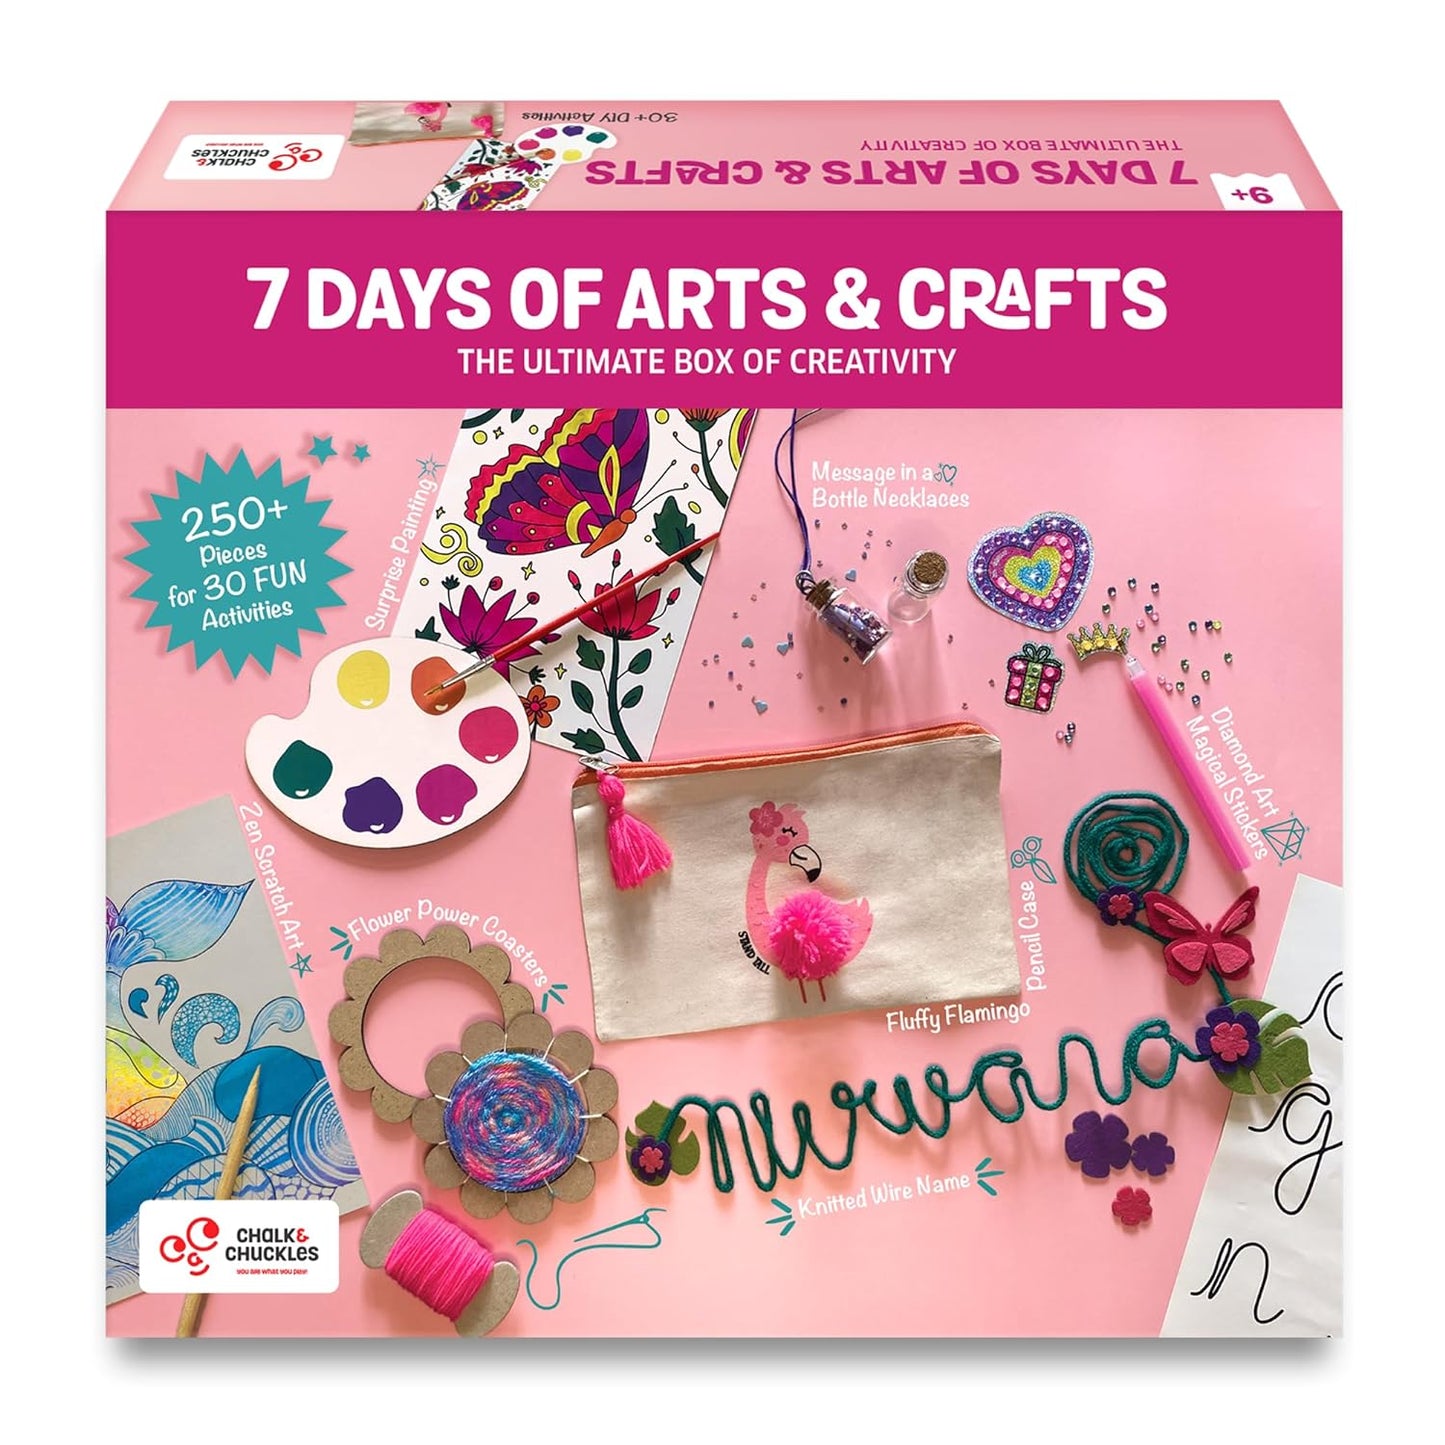 7 Days of Arts and Crafts - The Ultimate Box of Creativity